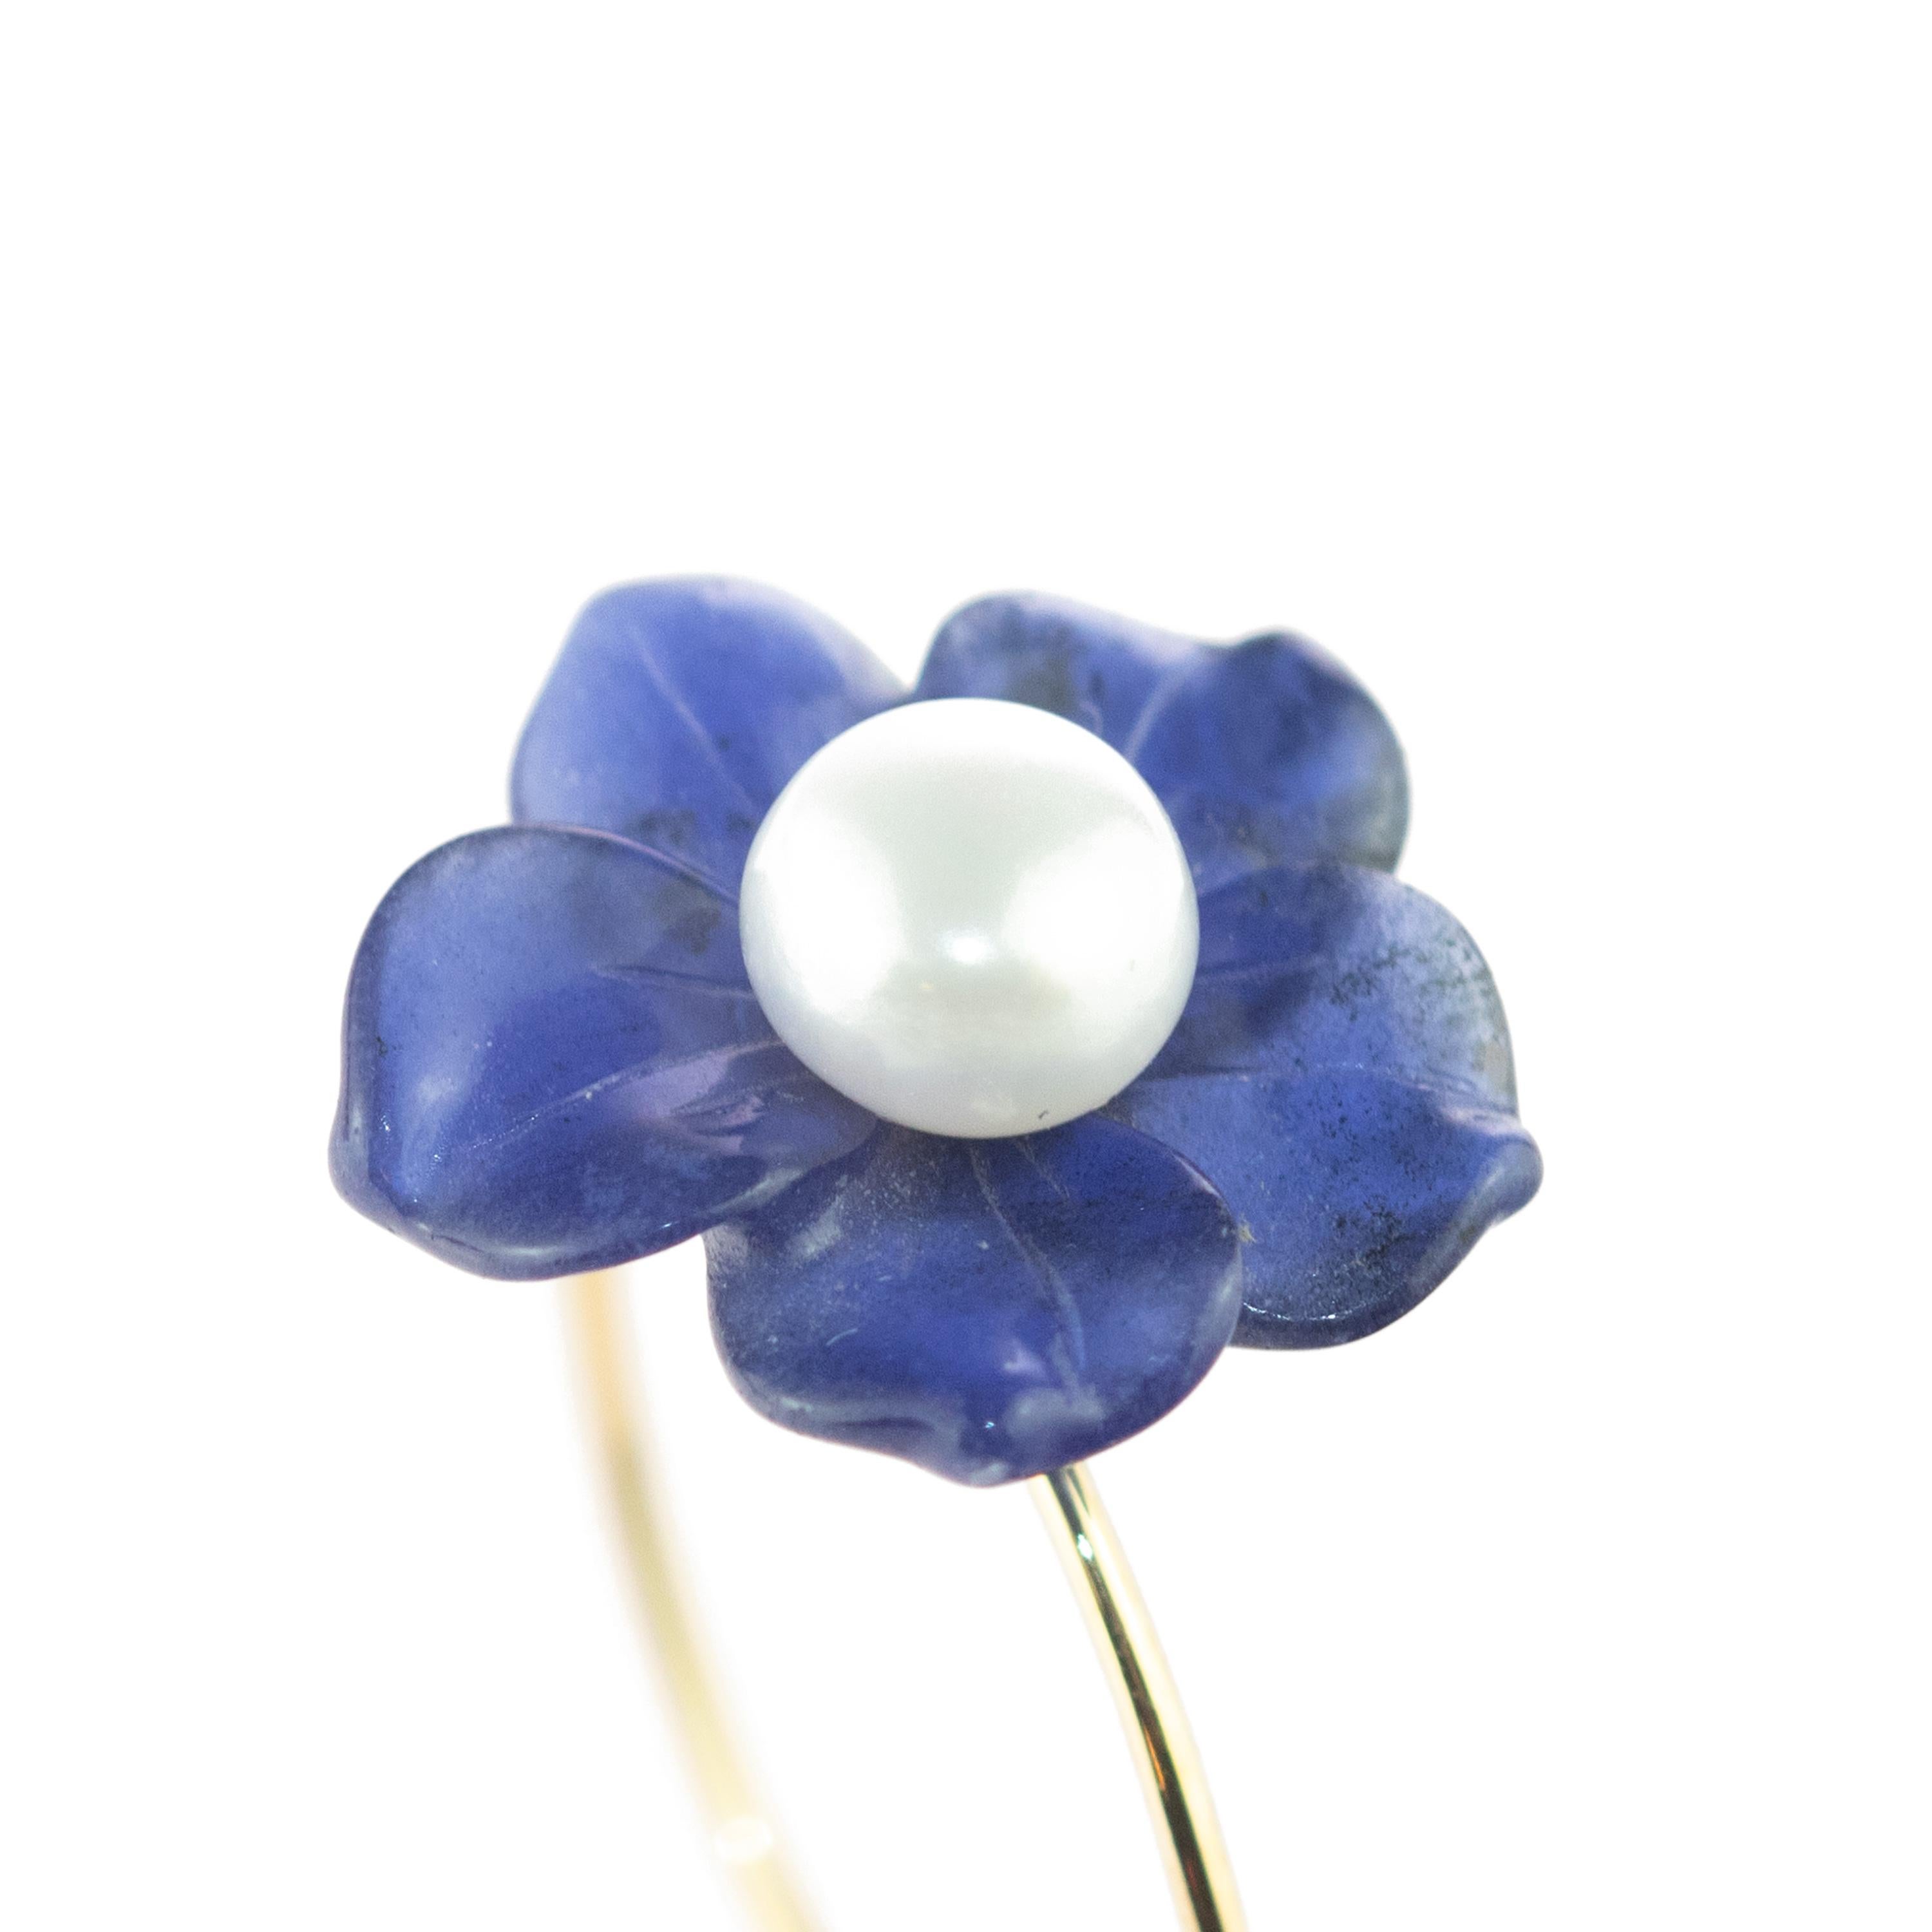 Astonishing natural Lapis Lazuli flower ring, with a central 1 carat freshwater pearl. Carved petals that evoke the italian handmade spring traditional jewelry work. 

Beautiful and delicate design that evokes the roots of beauty that are gradually